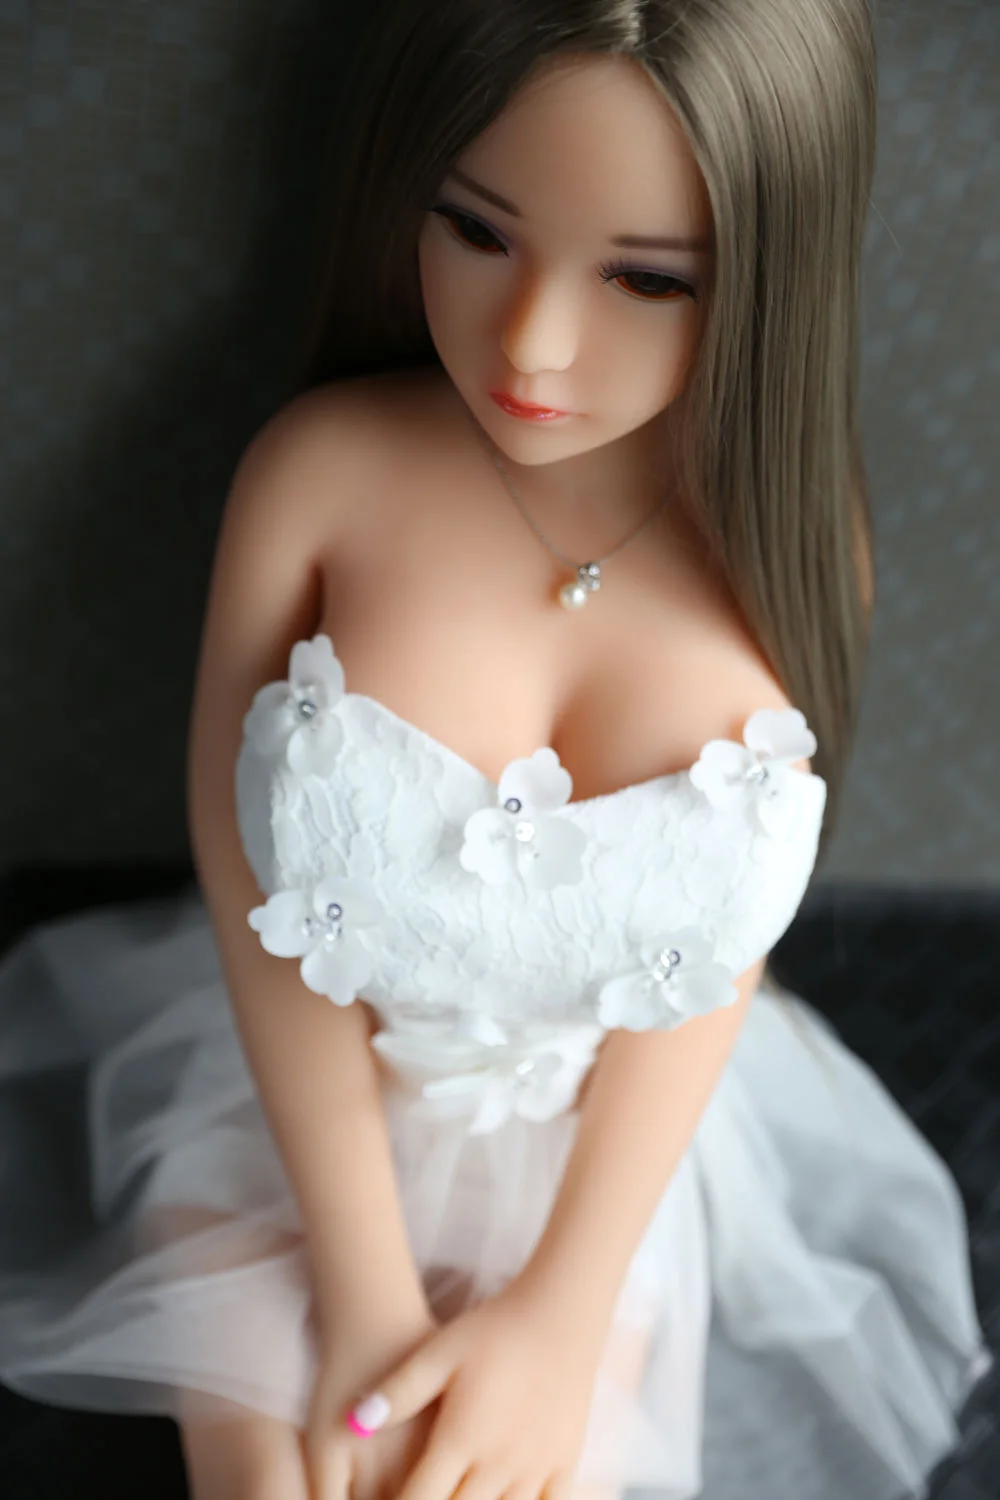 Mini sex doll with hands together